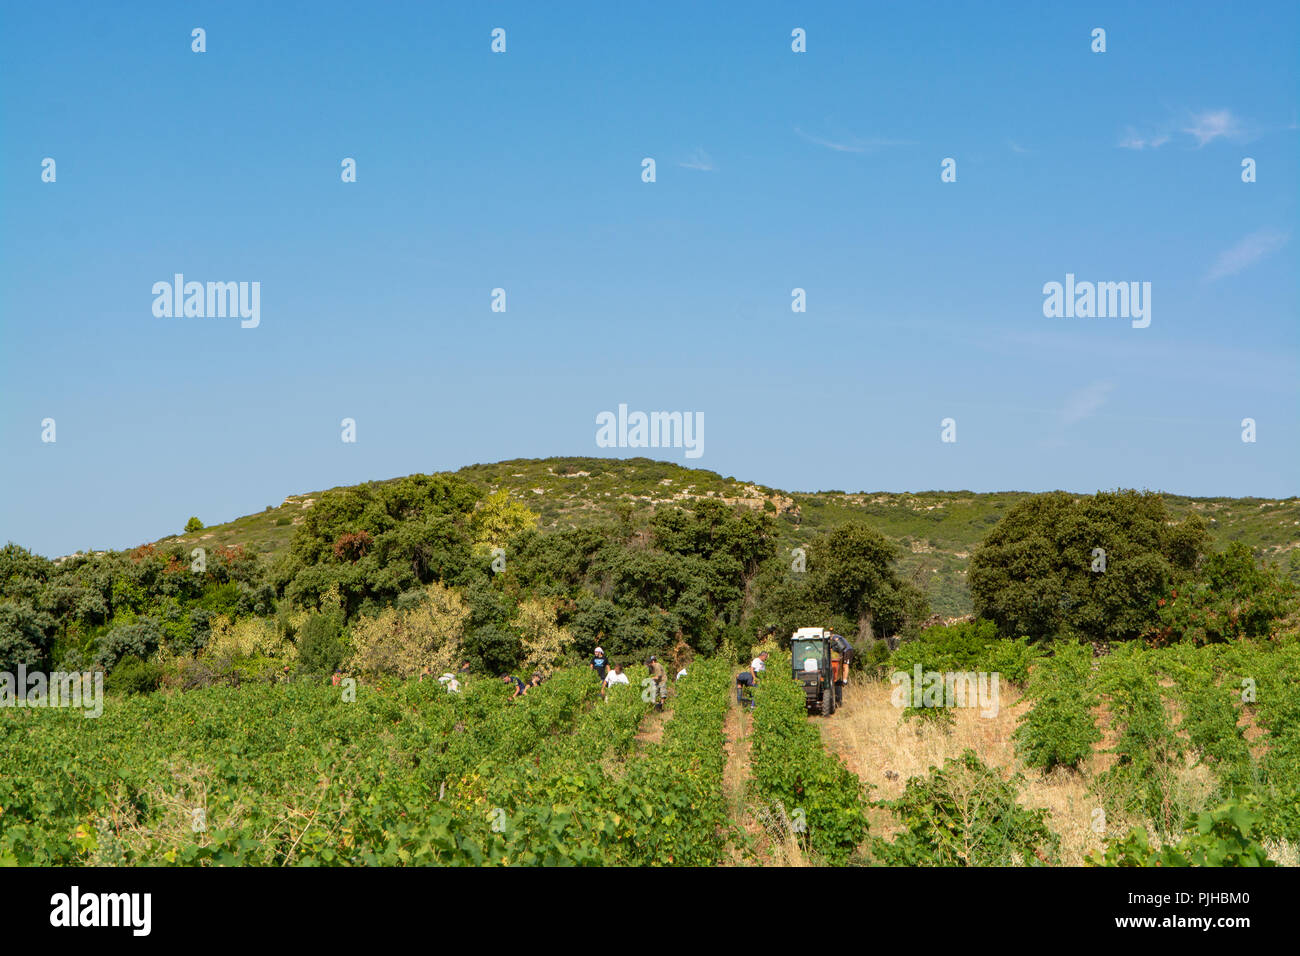 Landscape with workers collecting ripe white wine grapes plants on vineyard in south France, white ripe muscat grape new harvest Stock Photo